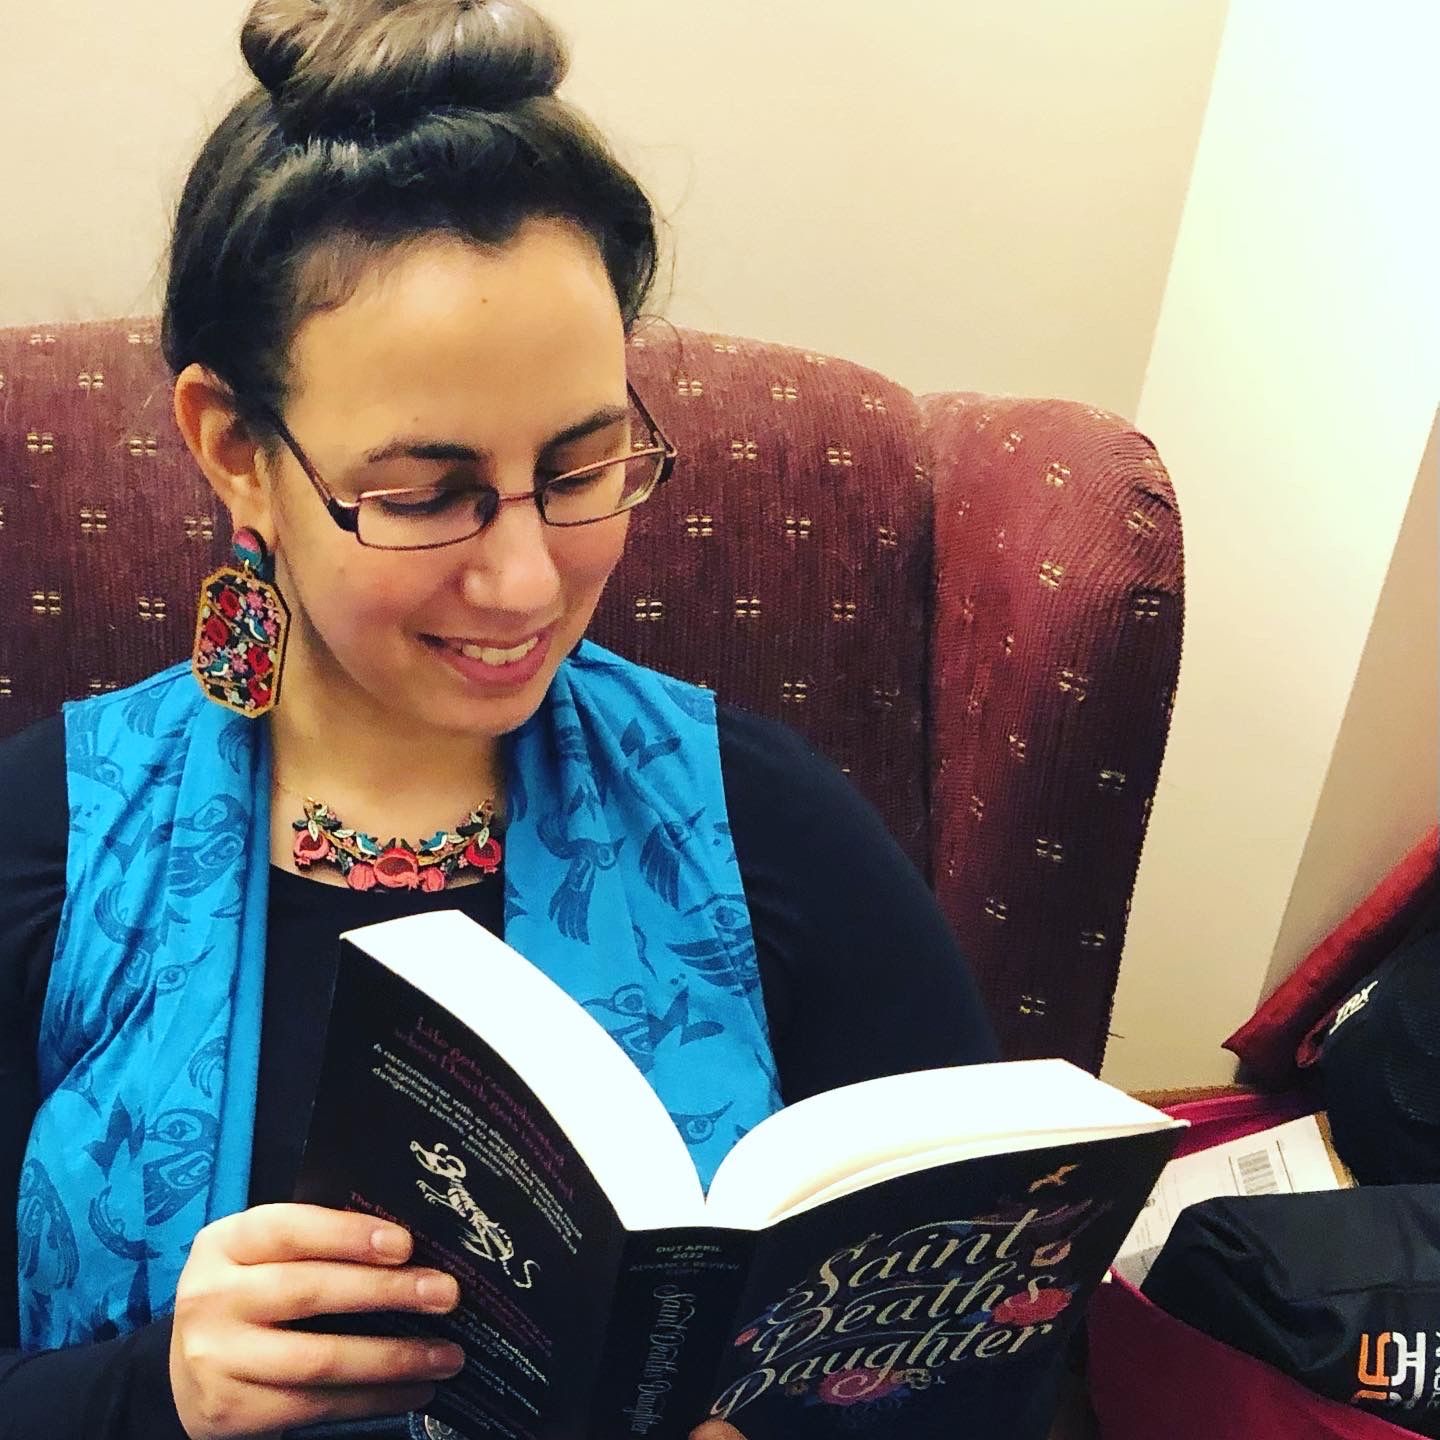 Photo of me reading Saint Death's Daughter while wearing frankly extraordinary statement earrings and necklace from Rylee and Ink, which are sculptural layers of lasercut wood handpainted to depict pomegranates, flowers, and bluebirds in bright jewel tones. 